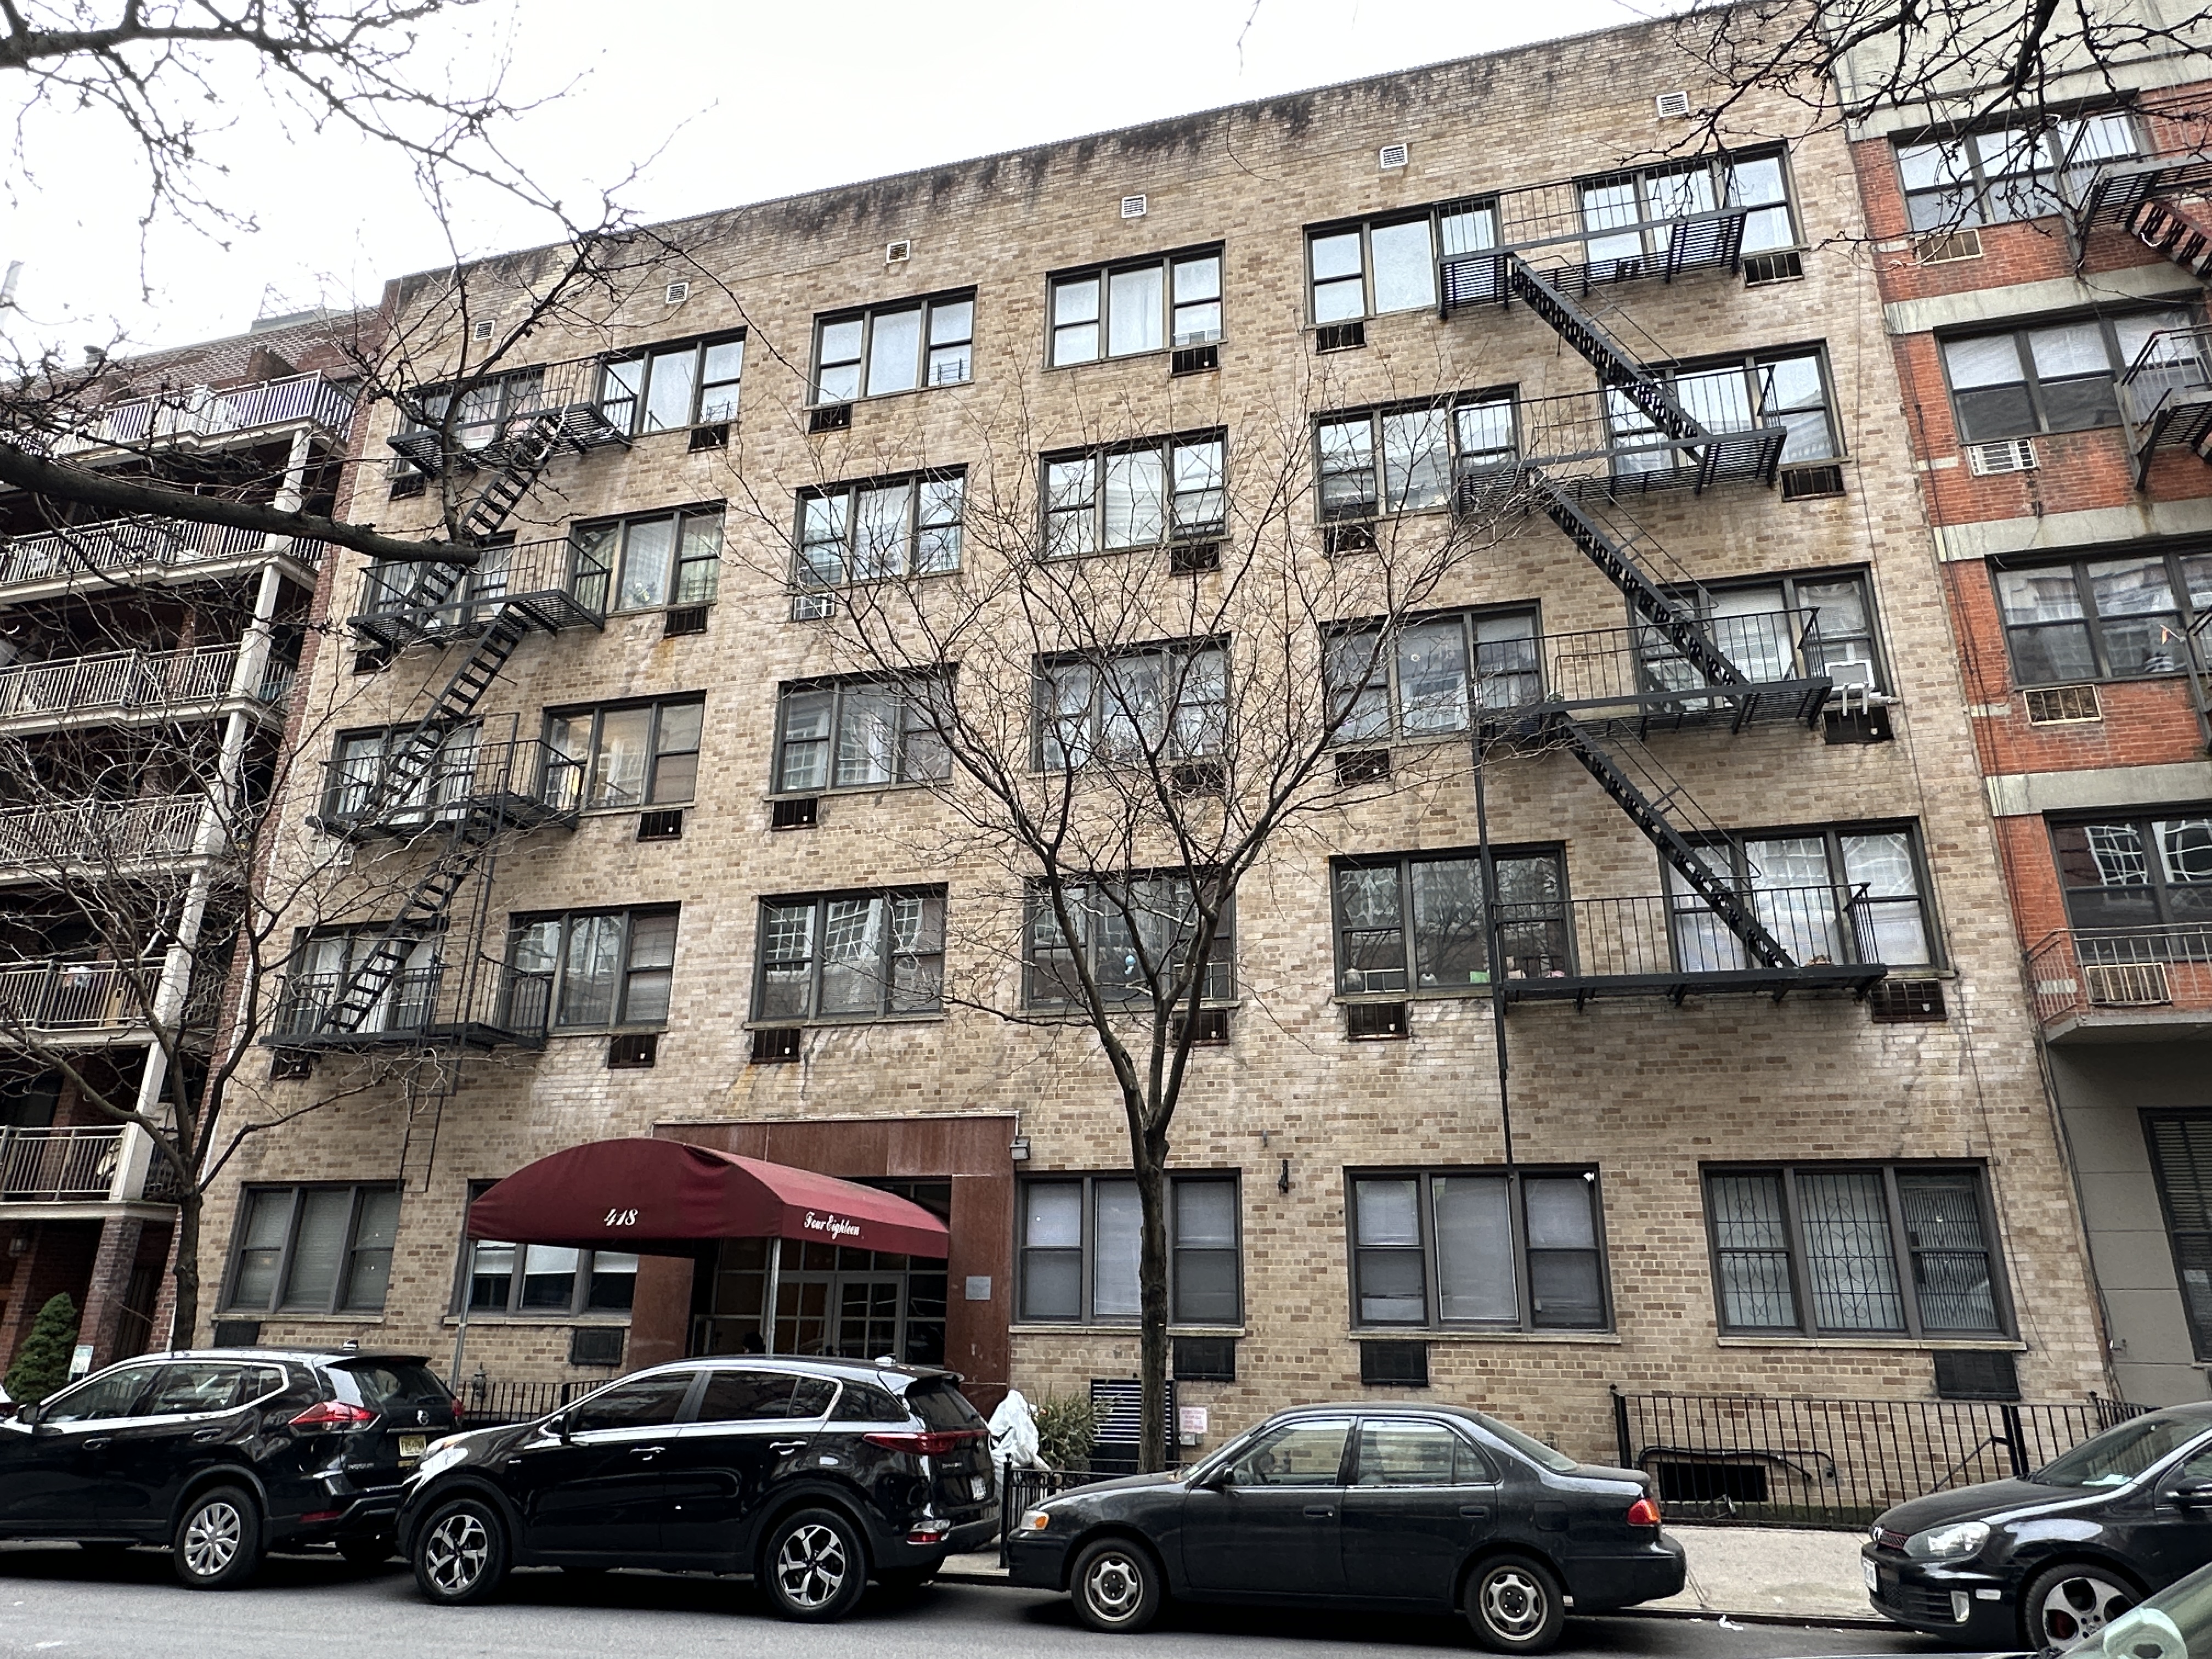 A total of 52 heat complaints were made about 418 East 88th Street during the five year period | Upper East Site